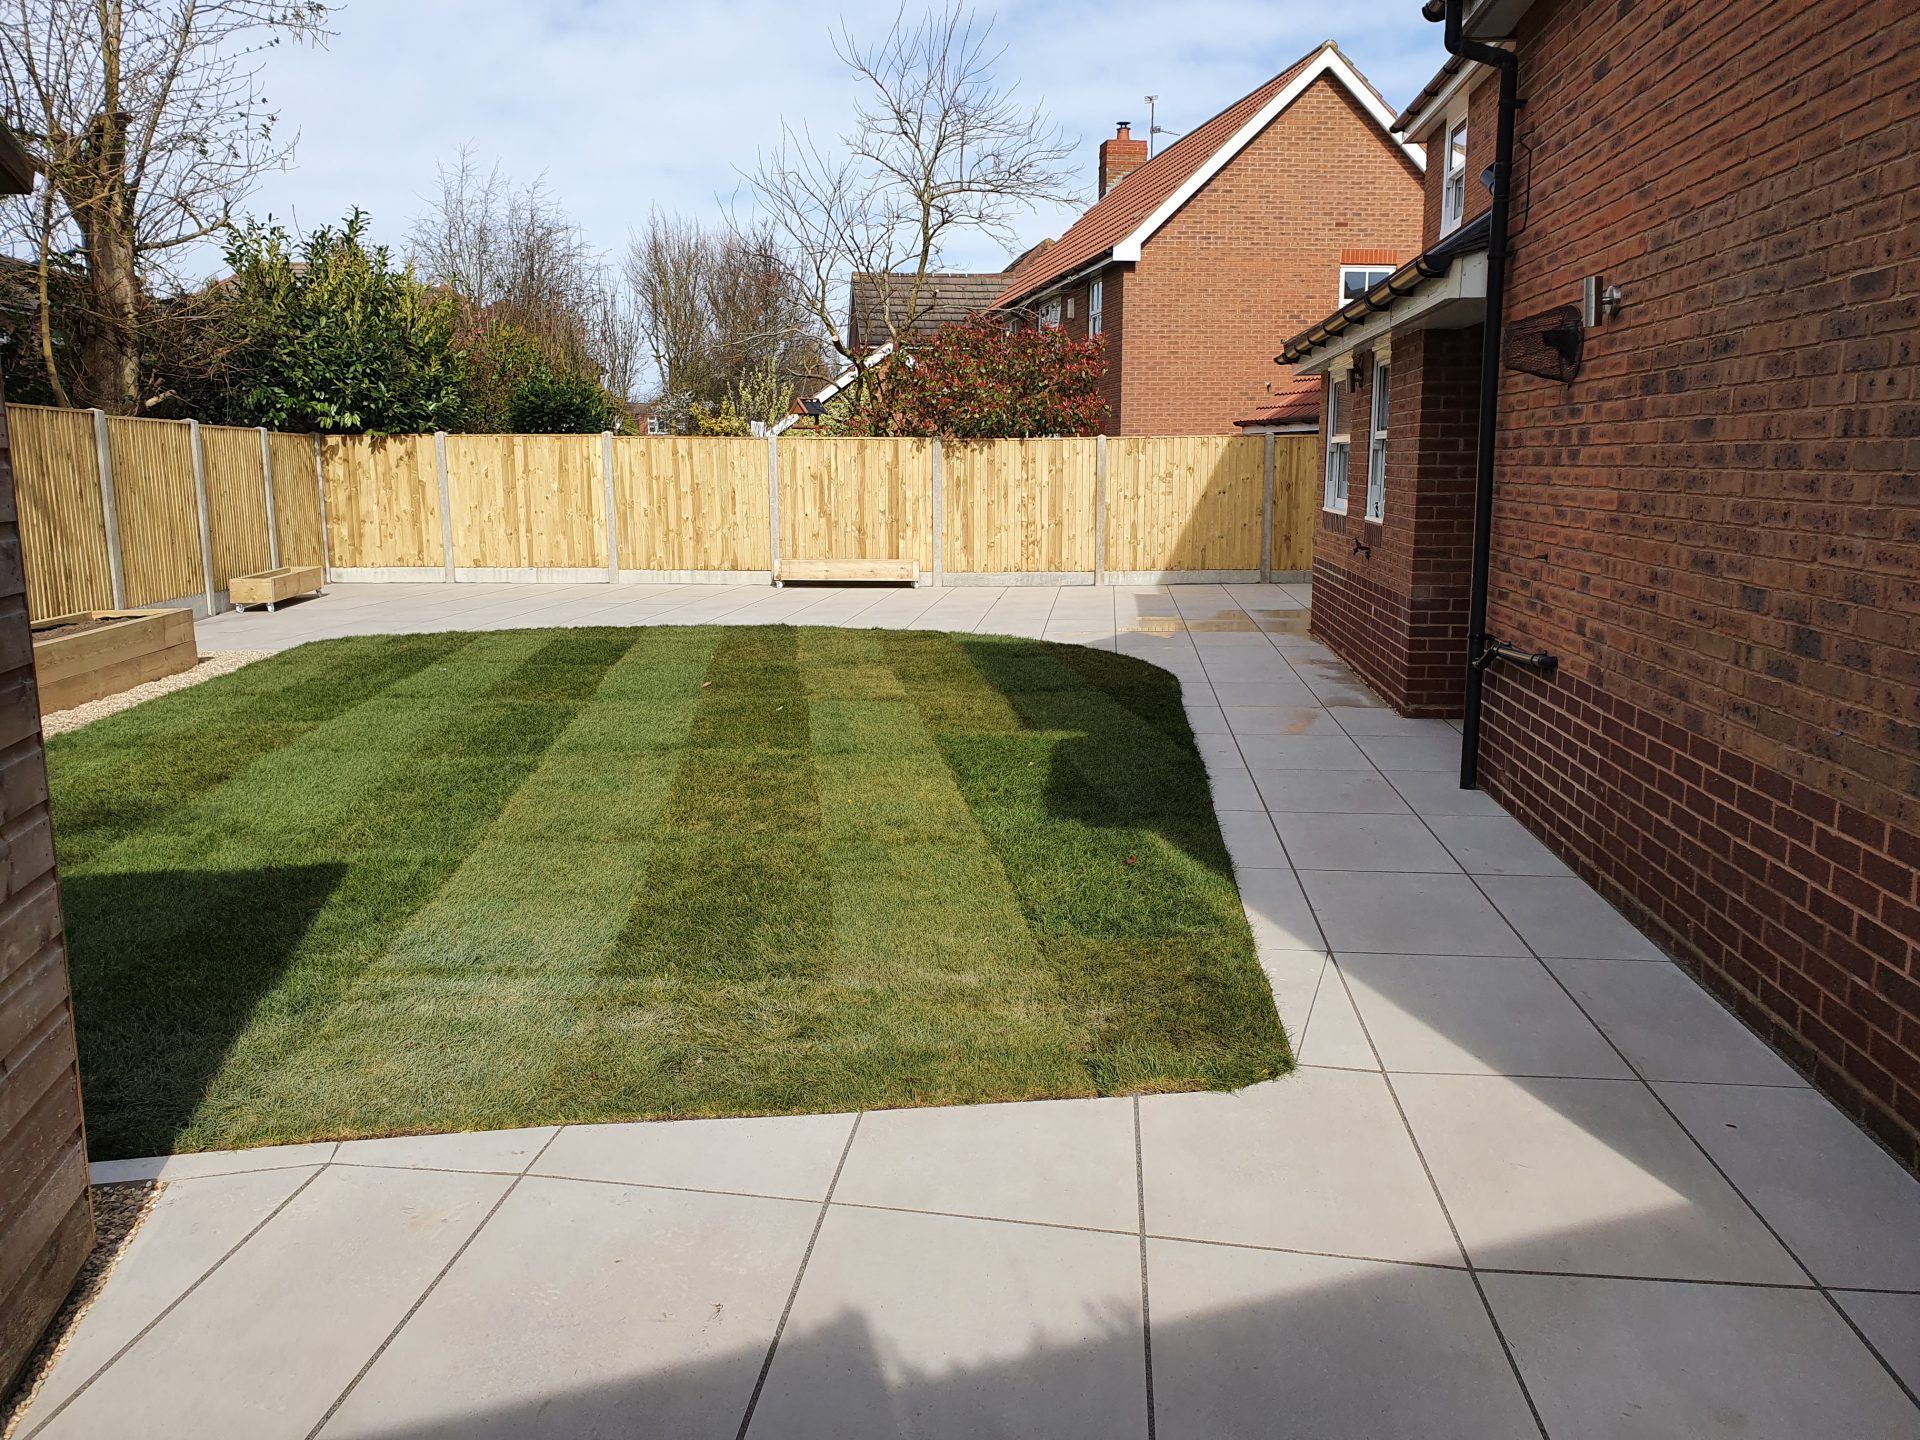 Light coloured slabbed landscaped garden, raised borders and fencing